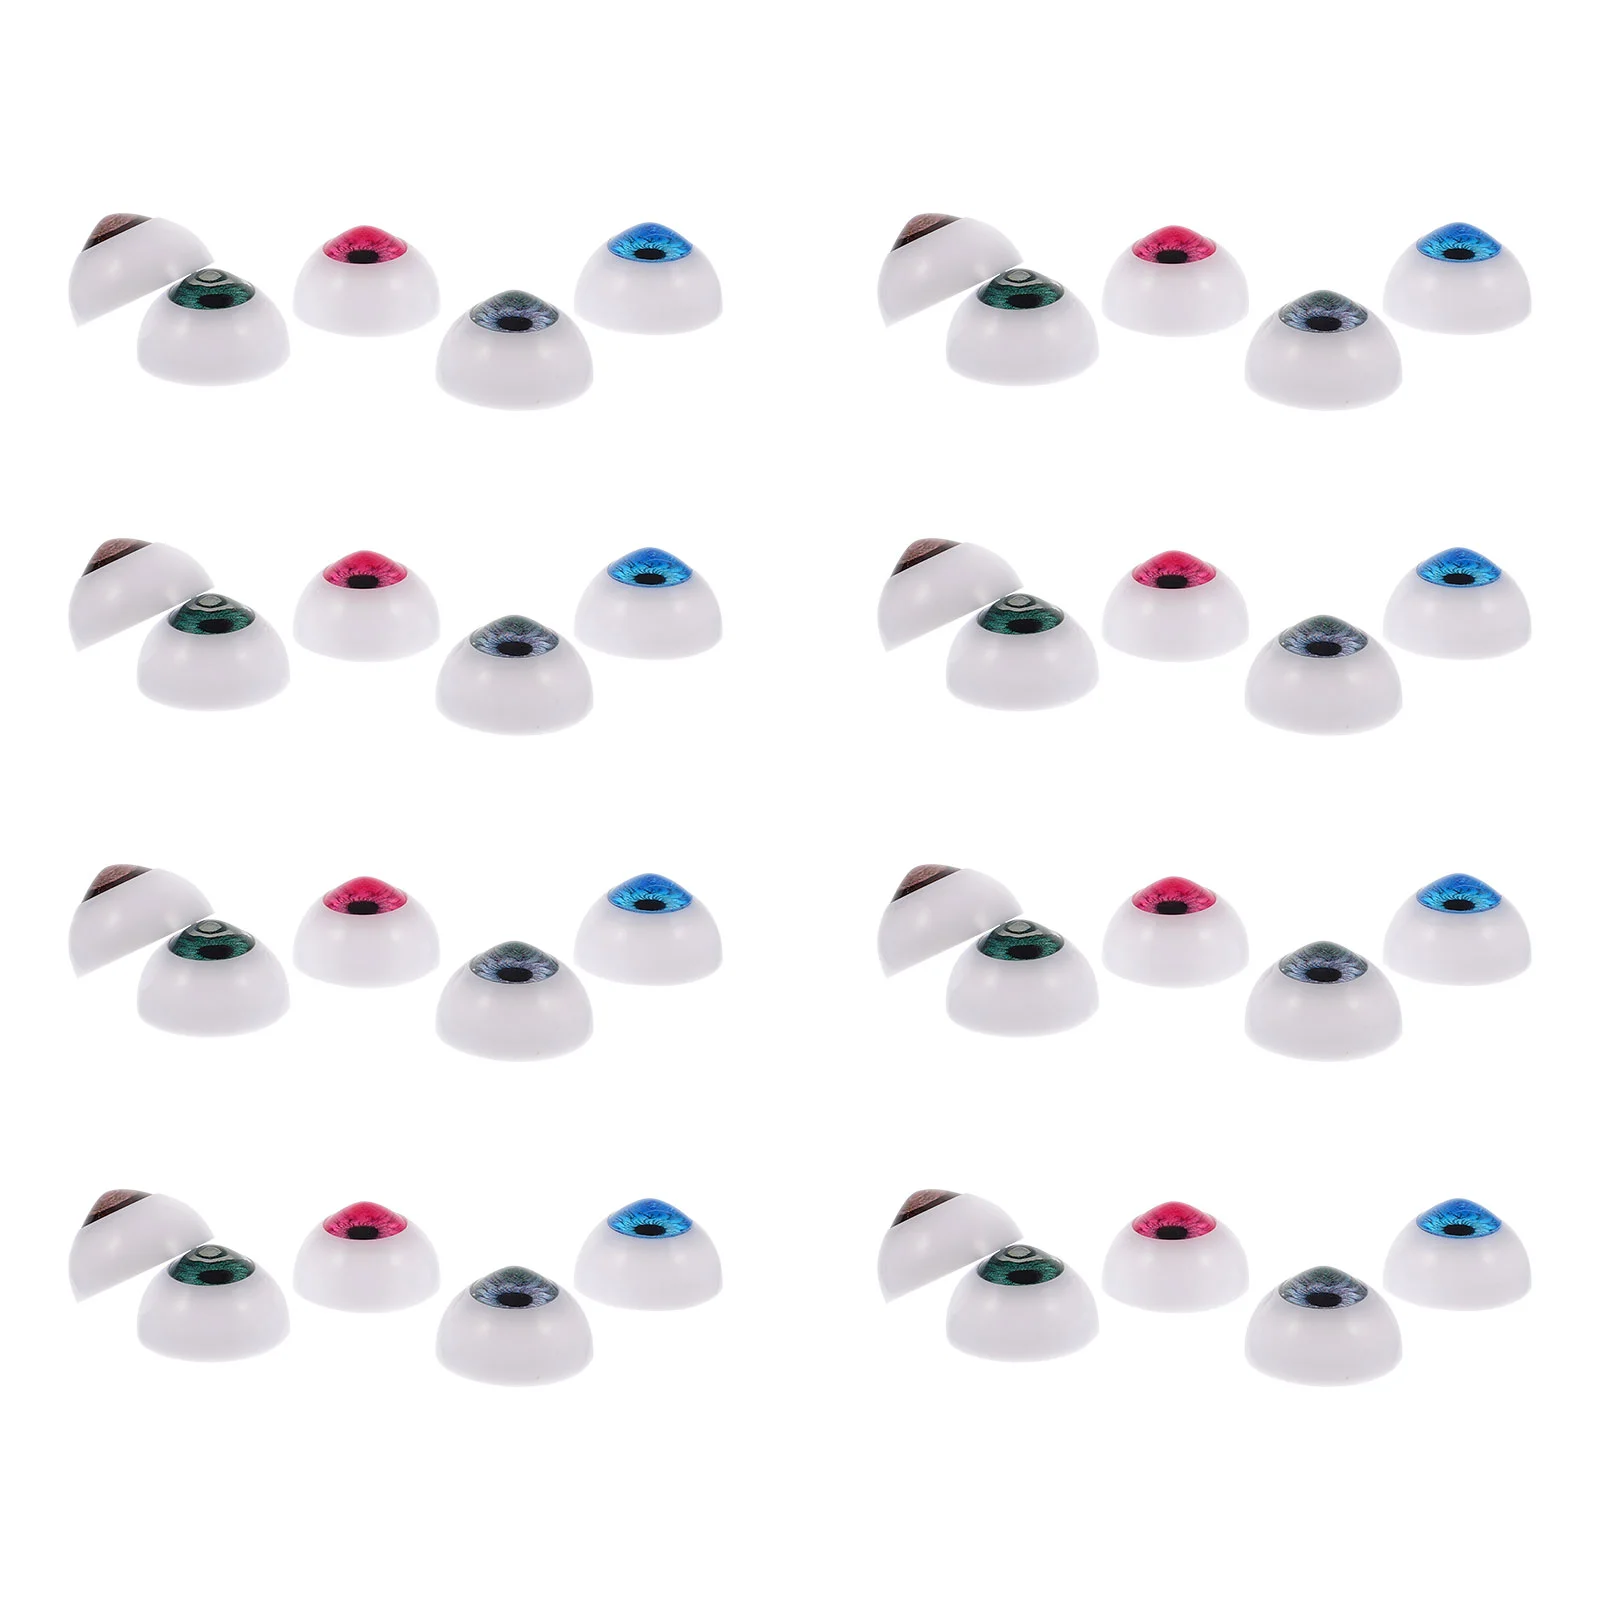 50 Pcs Decor Artificial Eyes DIY Material Halloween Props Realistic Acrylic Eyeball Eyeballs Craft Supplies Crafts professional 24 colors acrylic paint set 12ml hand painted wall drawing craft painting pigment set for art supplies